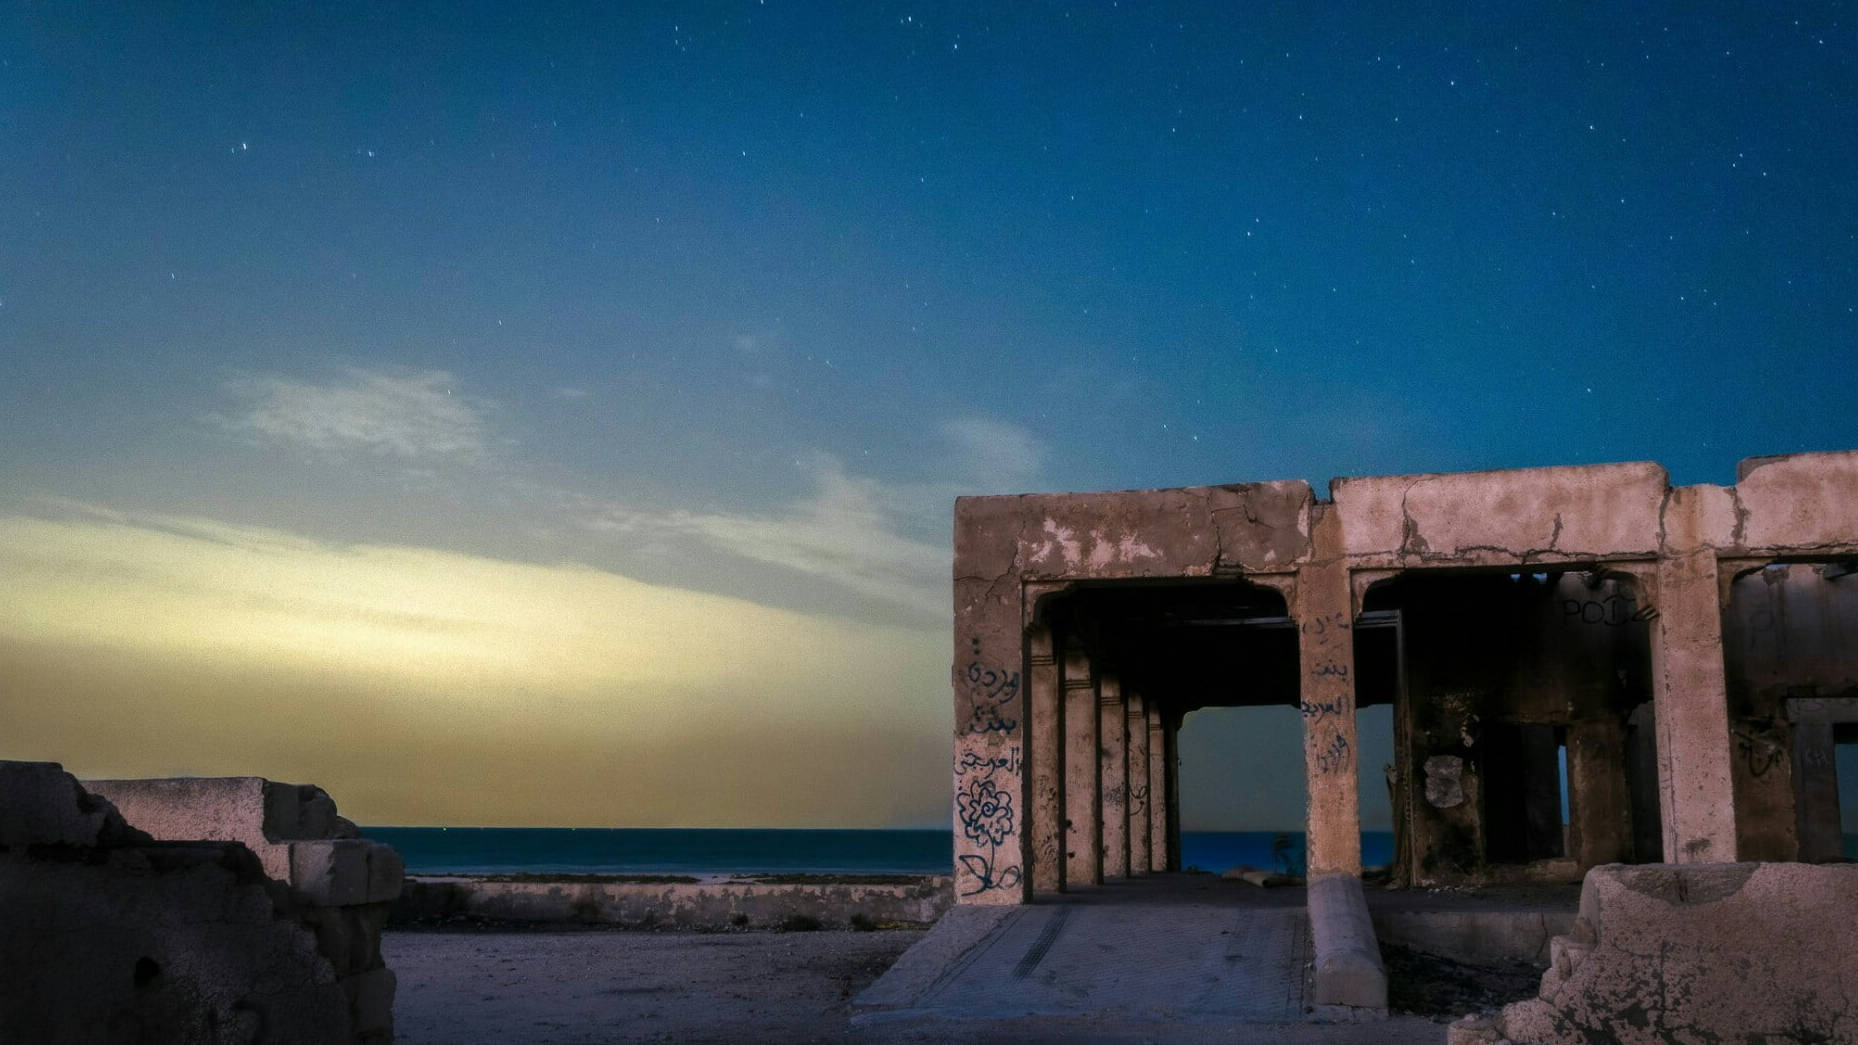 Caption: Majestic View Of An Abandoned Building In Basra, Iraq Background